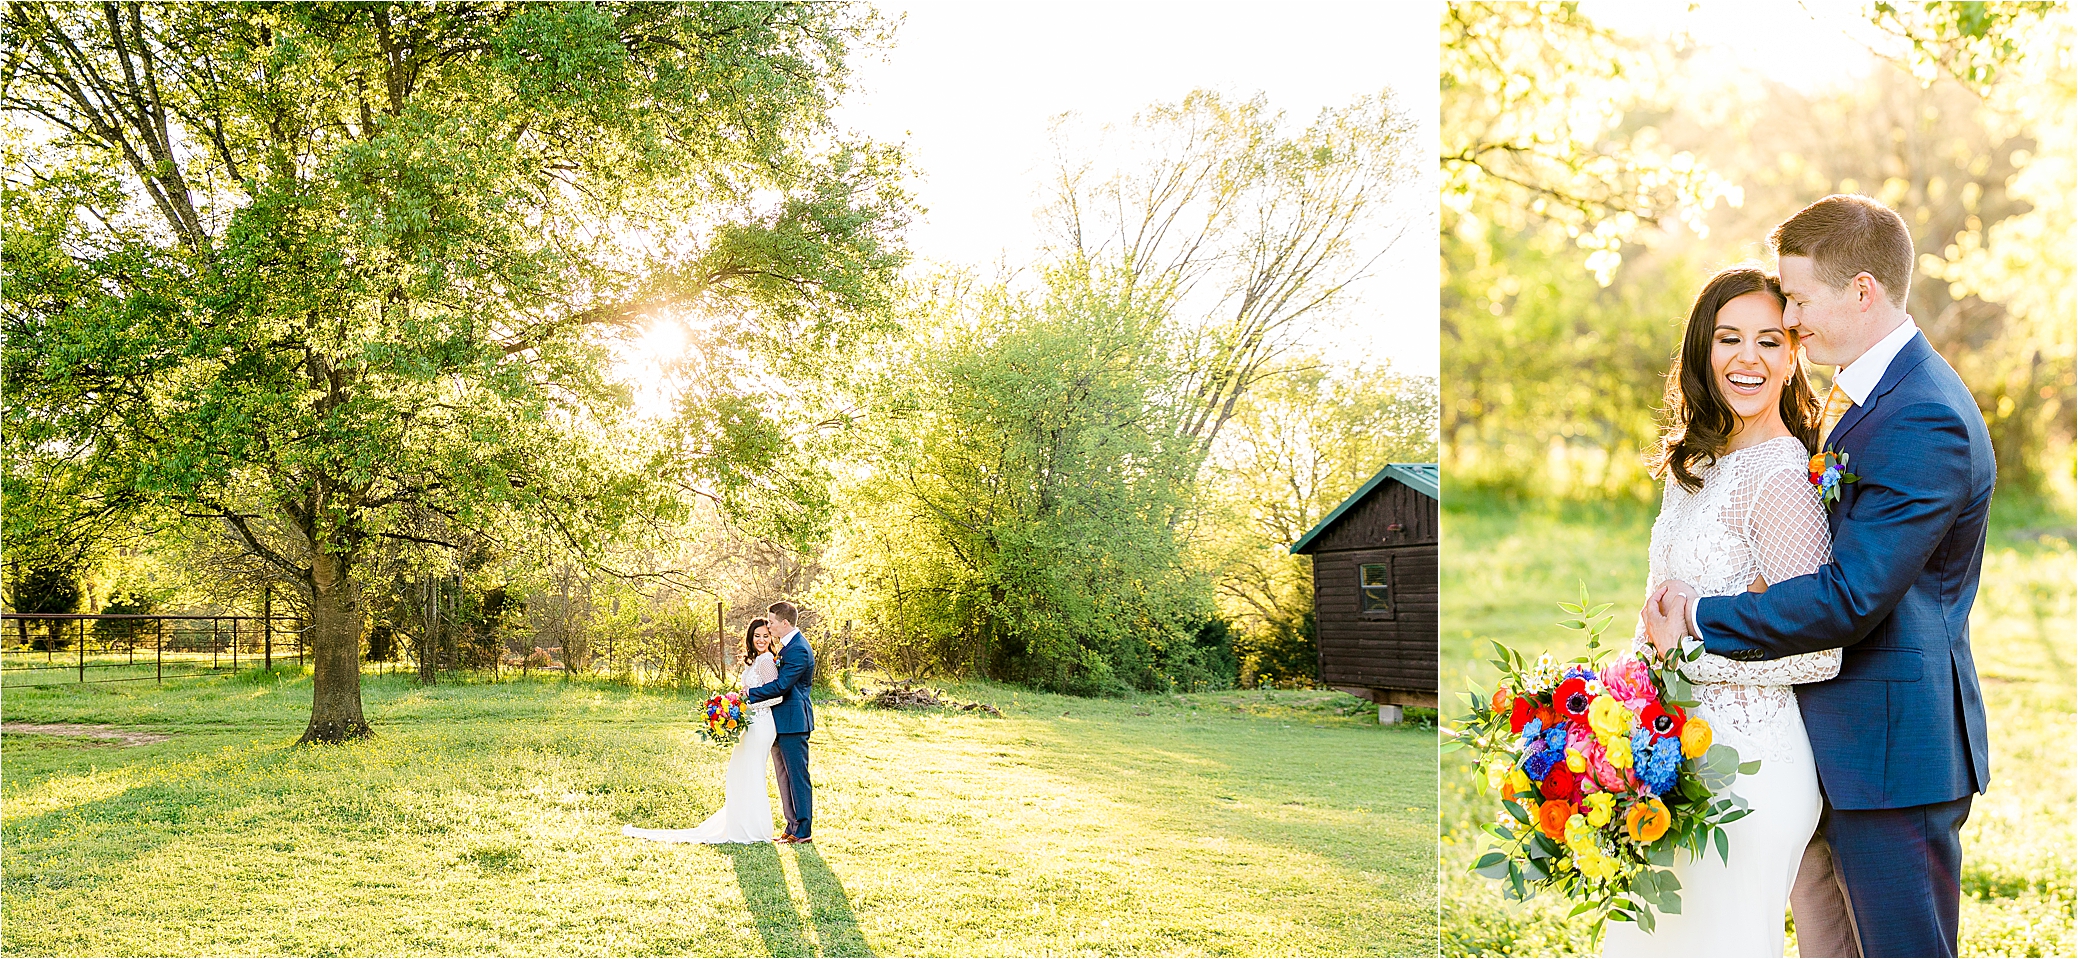 A groom nuzzles his wife's temple during their sunset wedding day portraits at Pineway Farms 